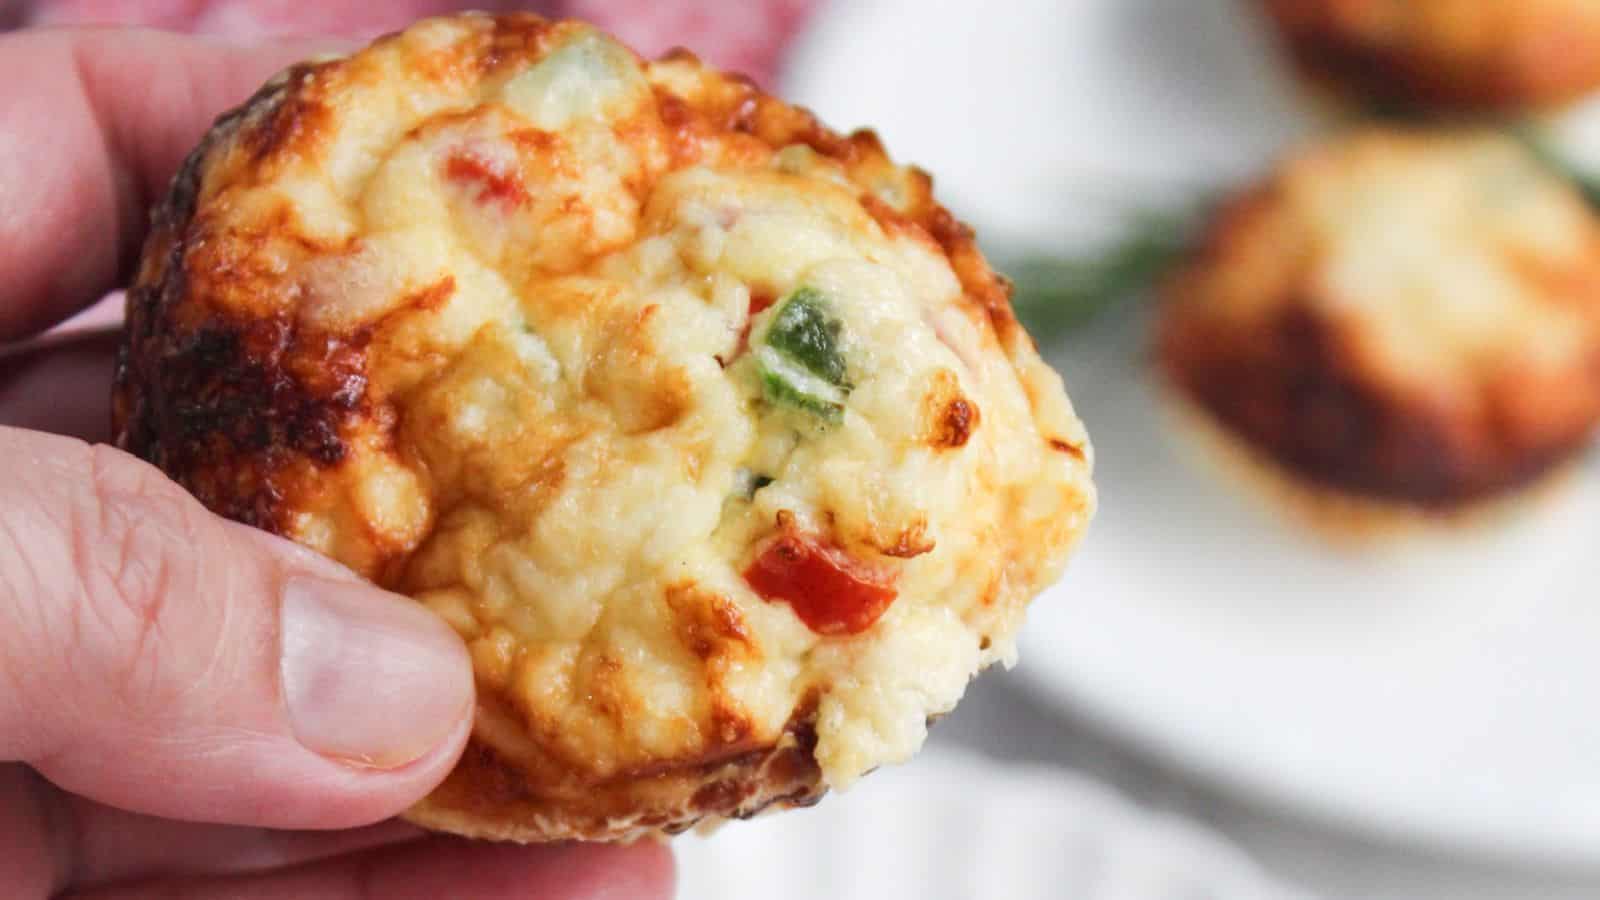 A close-up of a hand holding an egg white frittata muffin with visible toppings of cheese and chopped peppers.